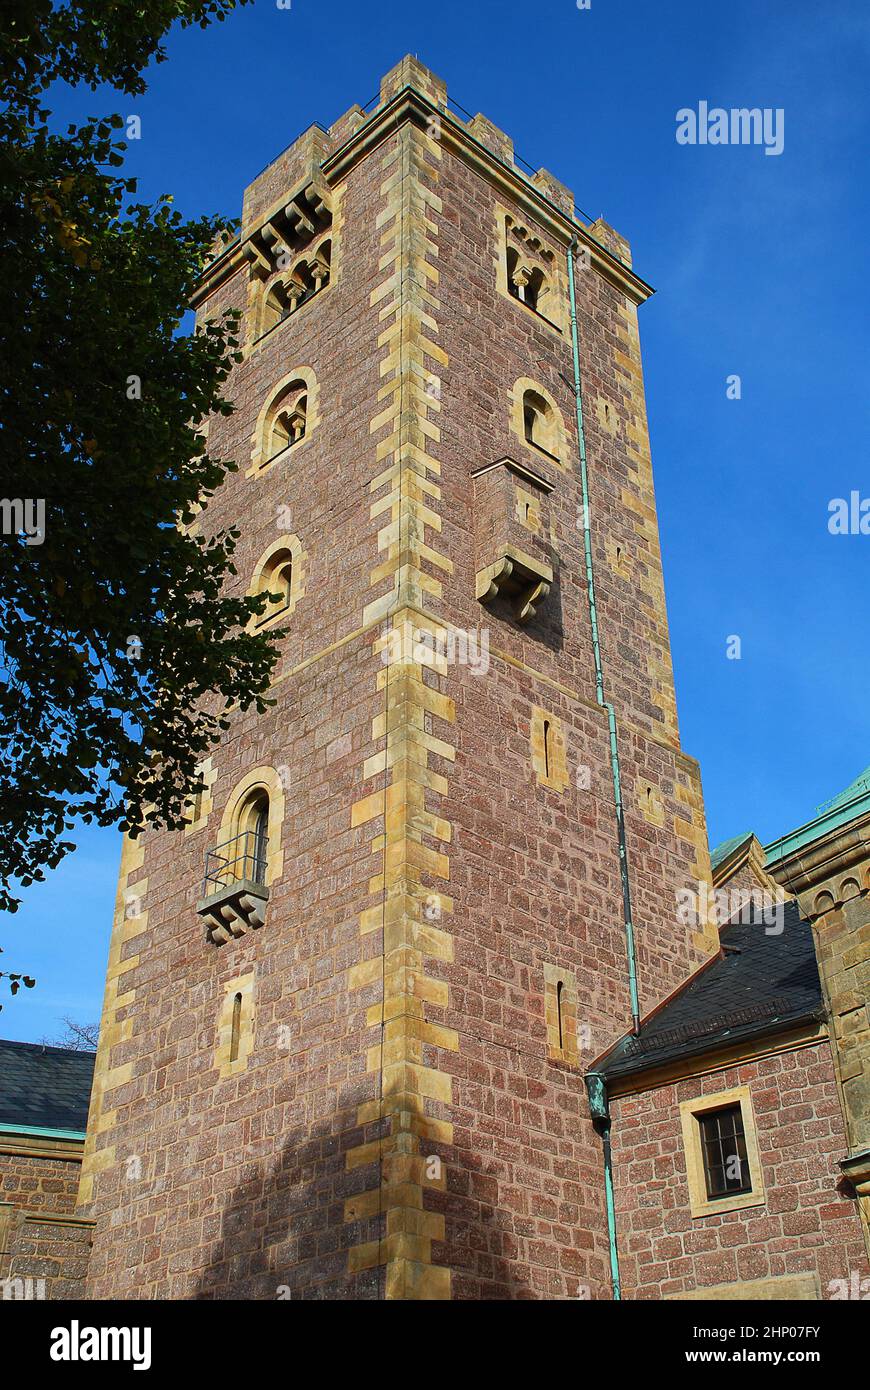 Wartburg castle near Eisenach, keep (German Bergfried) and inner courtyard, Germany, Europe. A keep  is a type of fortified tower built within castles Stock Photo